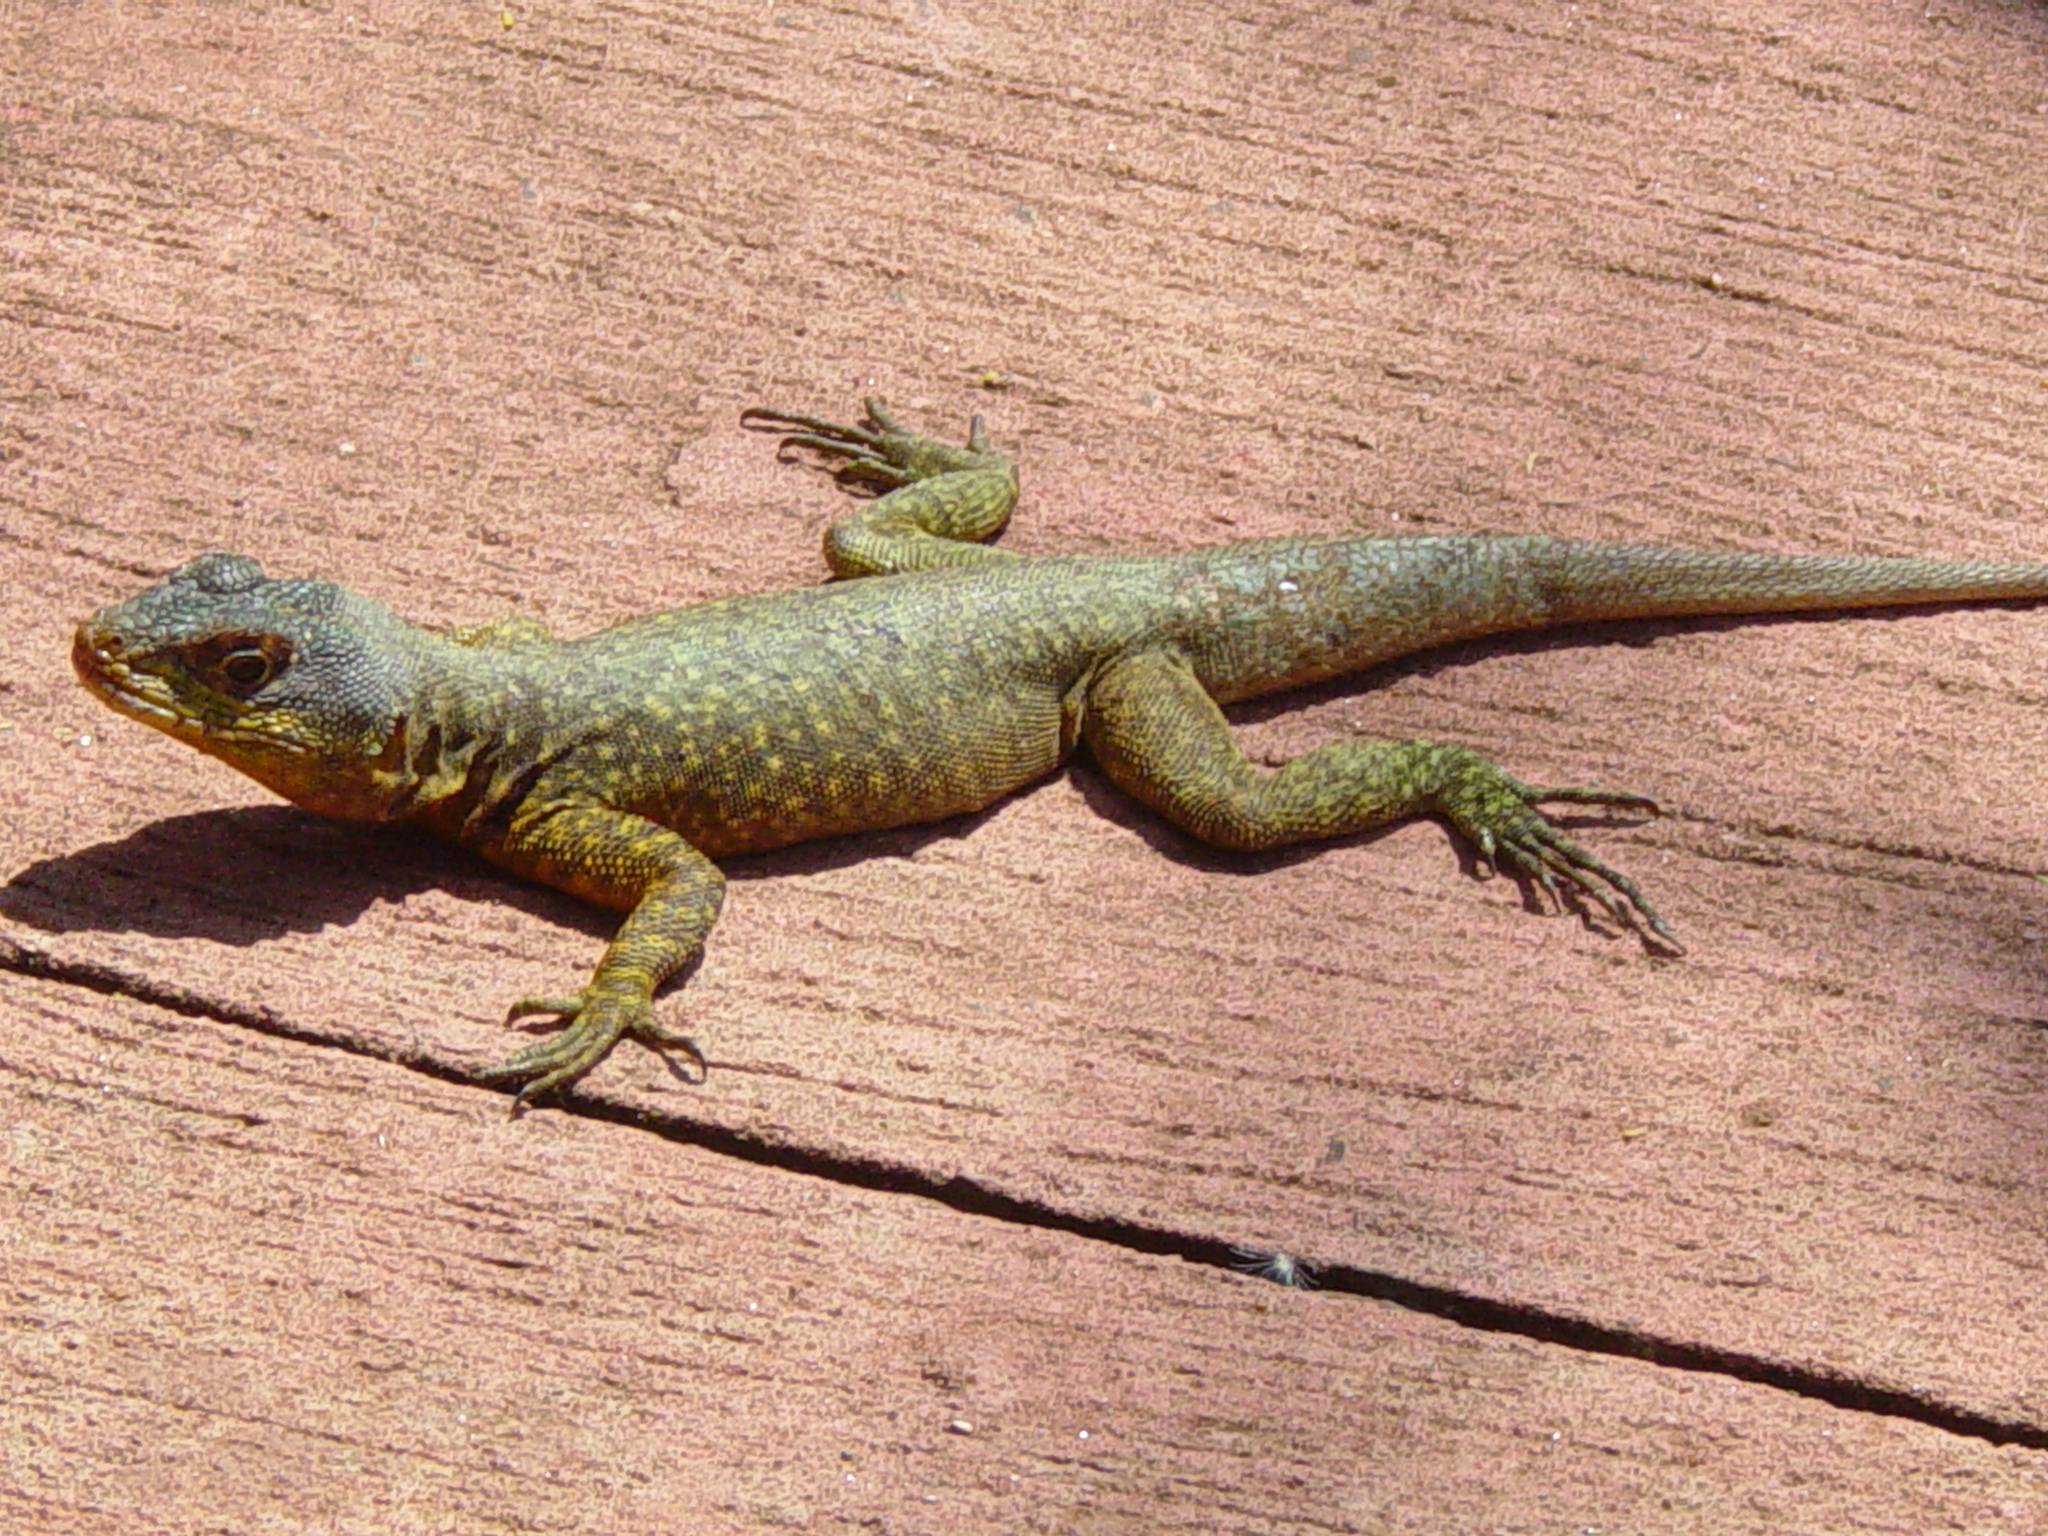 an image of a lizard that is on the ground